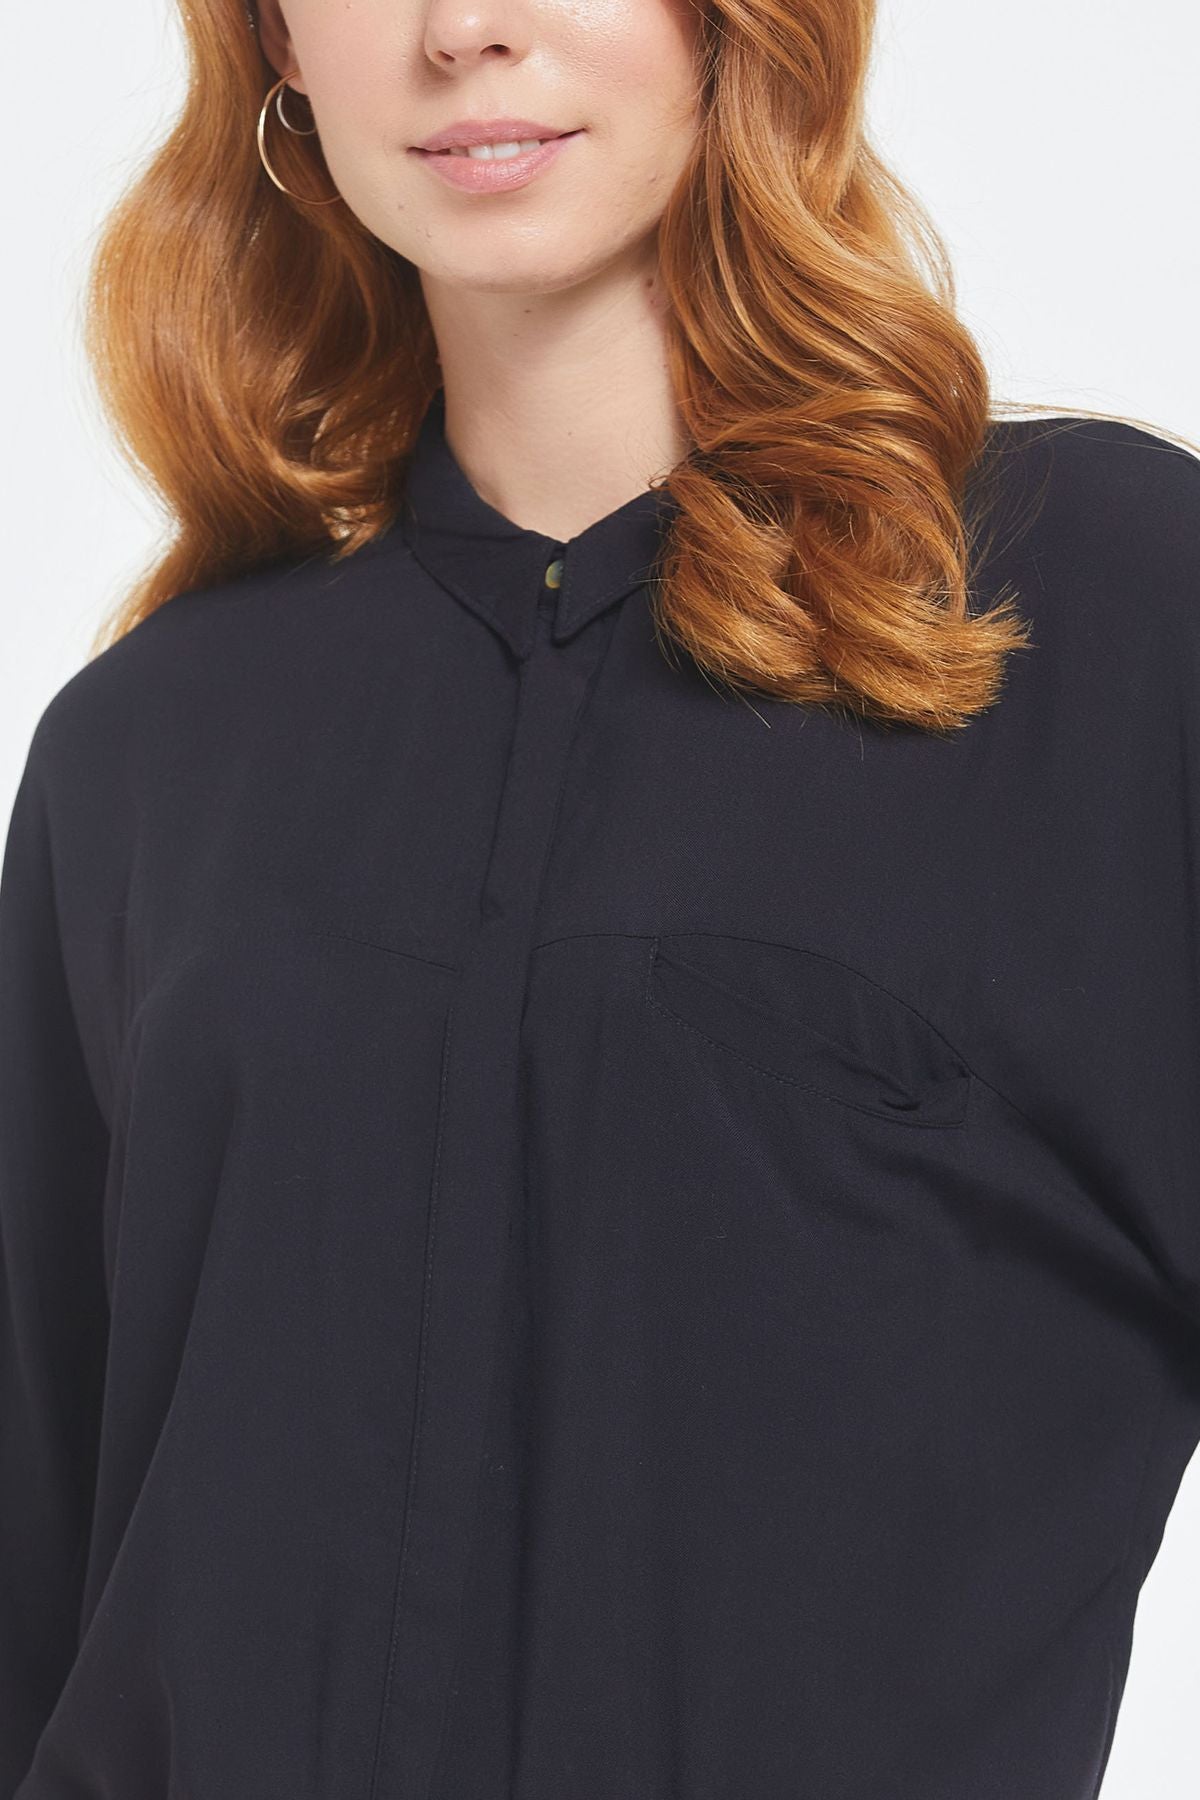 Loose Fit Women's Shirt with Classic Collar Black